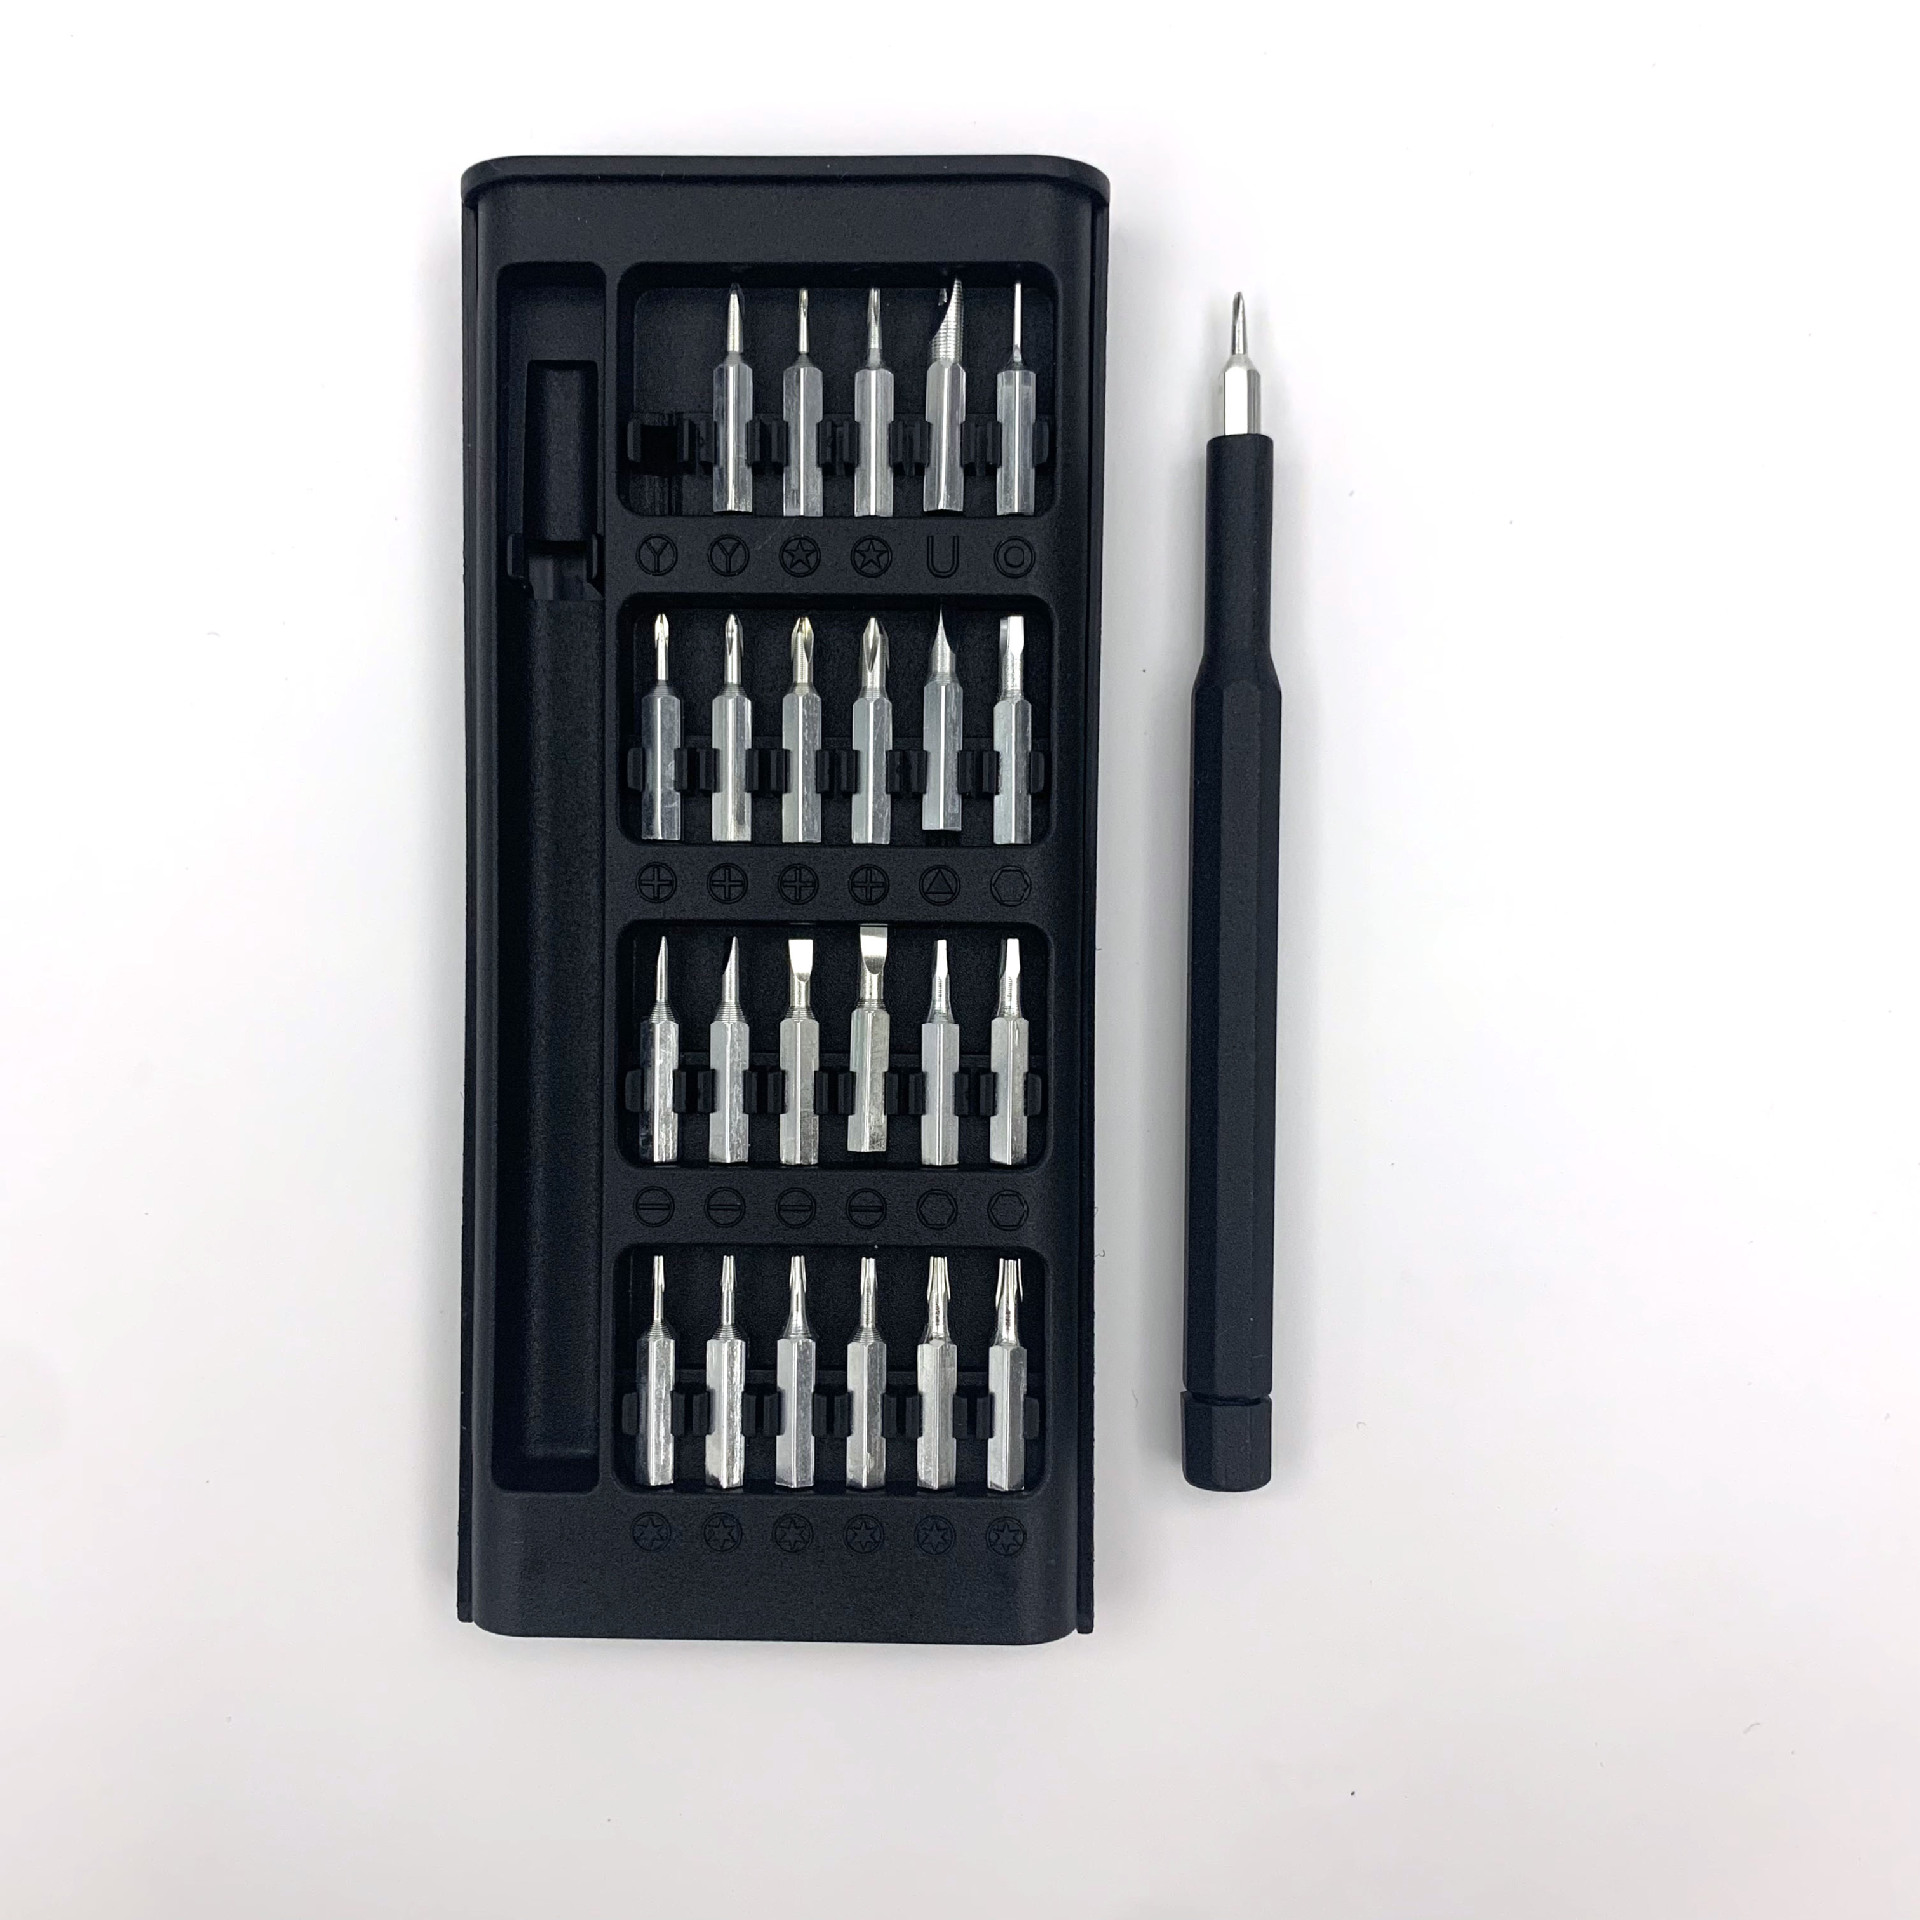 24-in-1 precision magnetic buckle screwdriver mobile phone c..